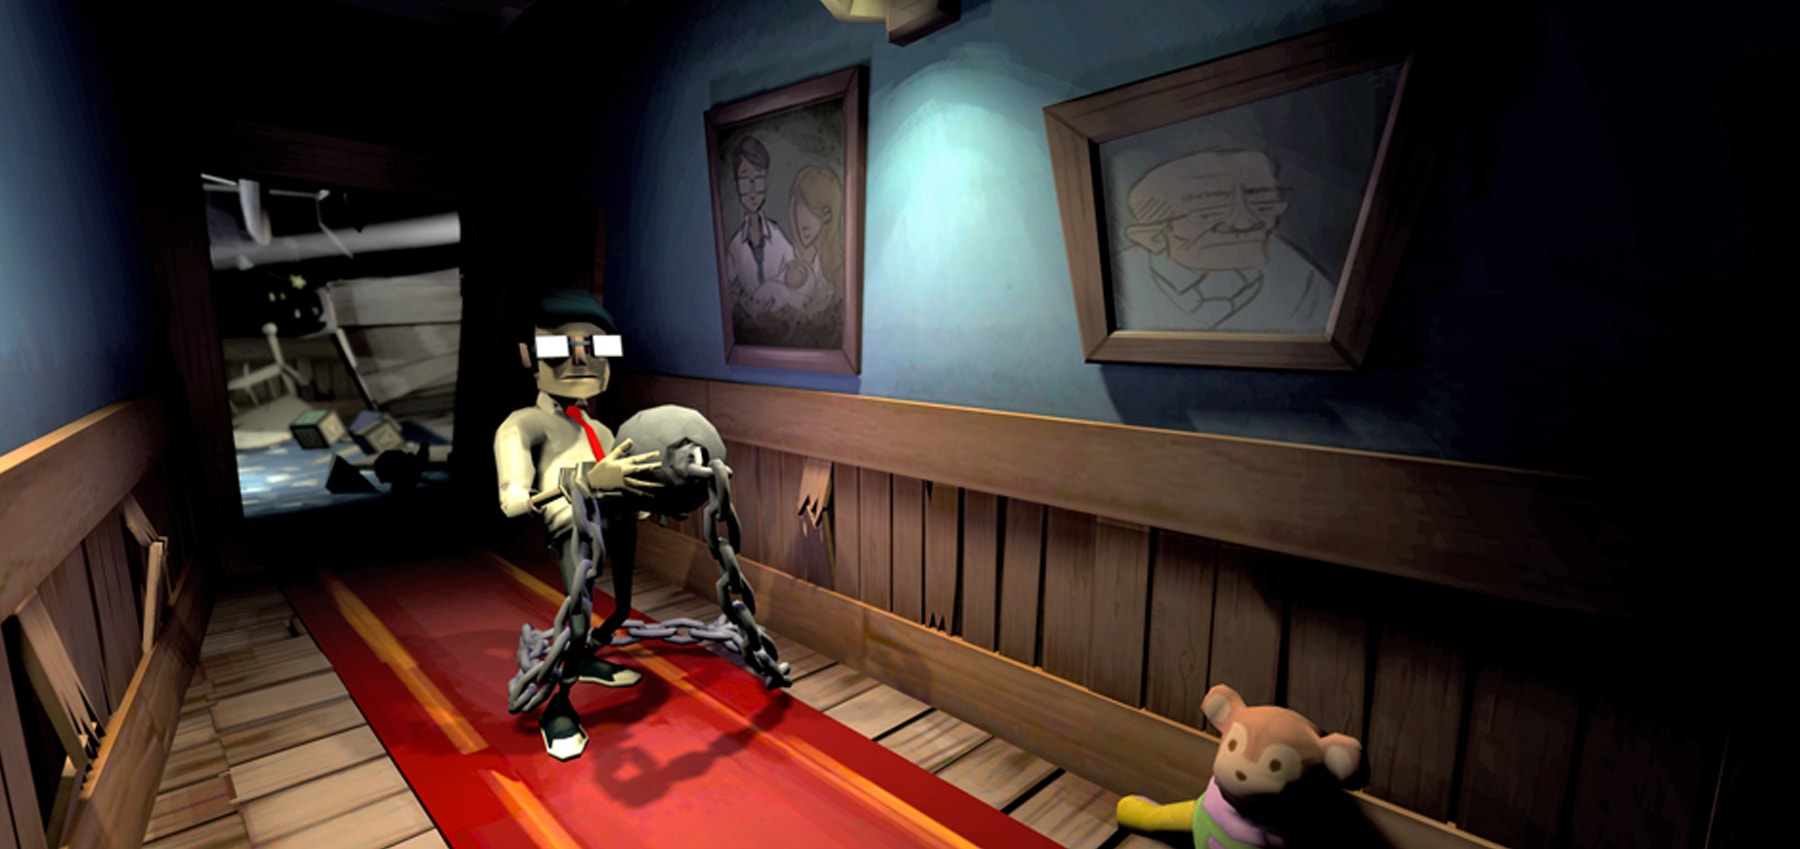 Screenshot of the Chained main character stumbling down a hallway carrying a ball and chain